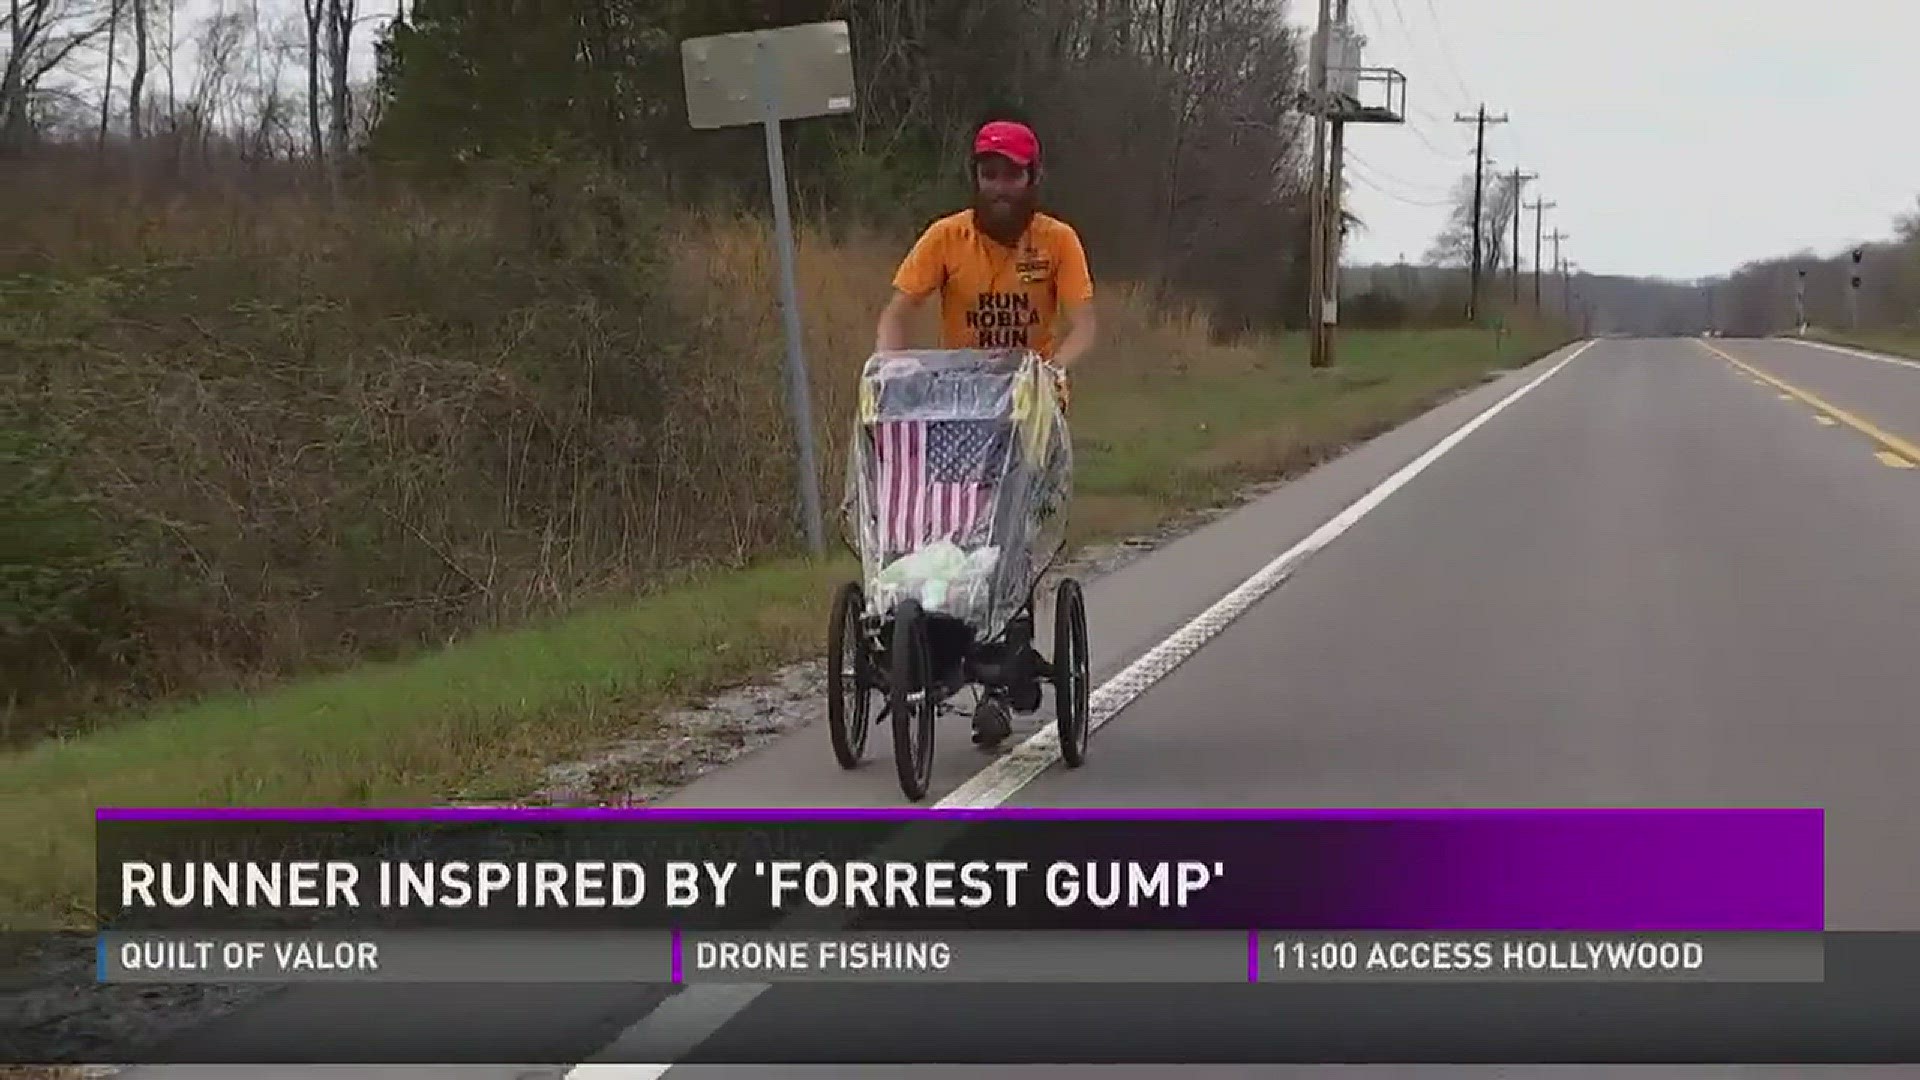 March 30, 2017: Rob Pope just felt like running. Inspired by the movie Forrest Gump, the man from Liverpool, England is making his way across America.